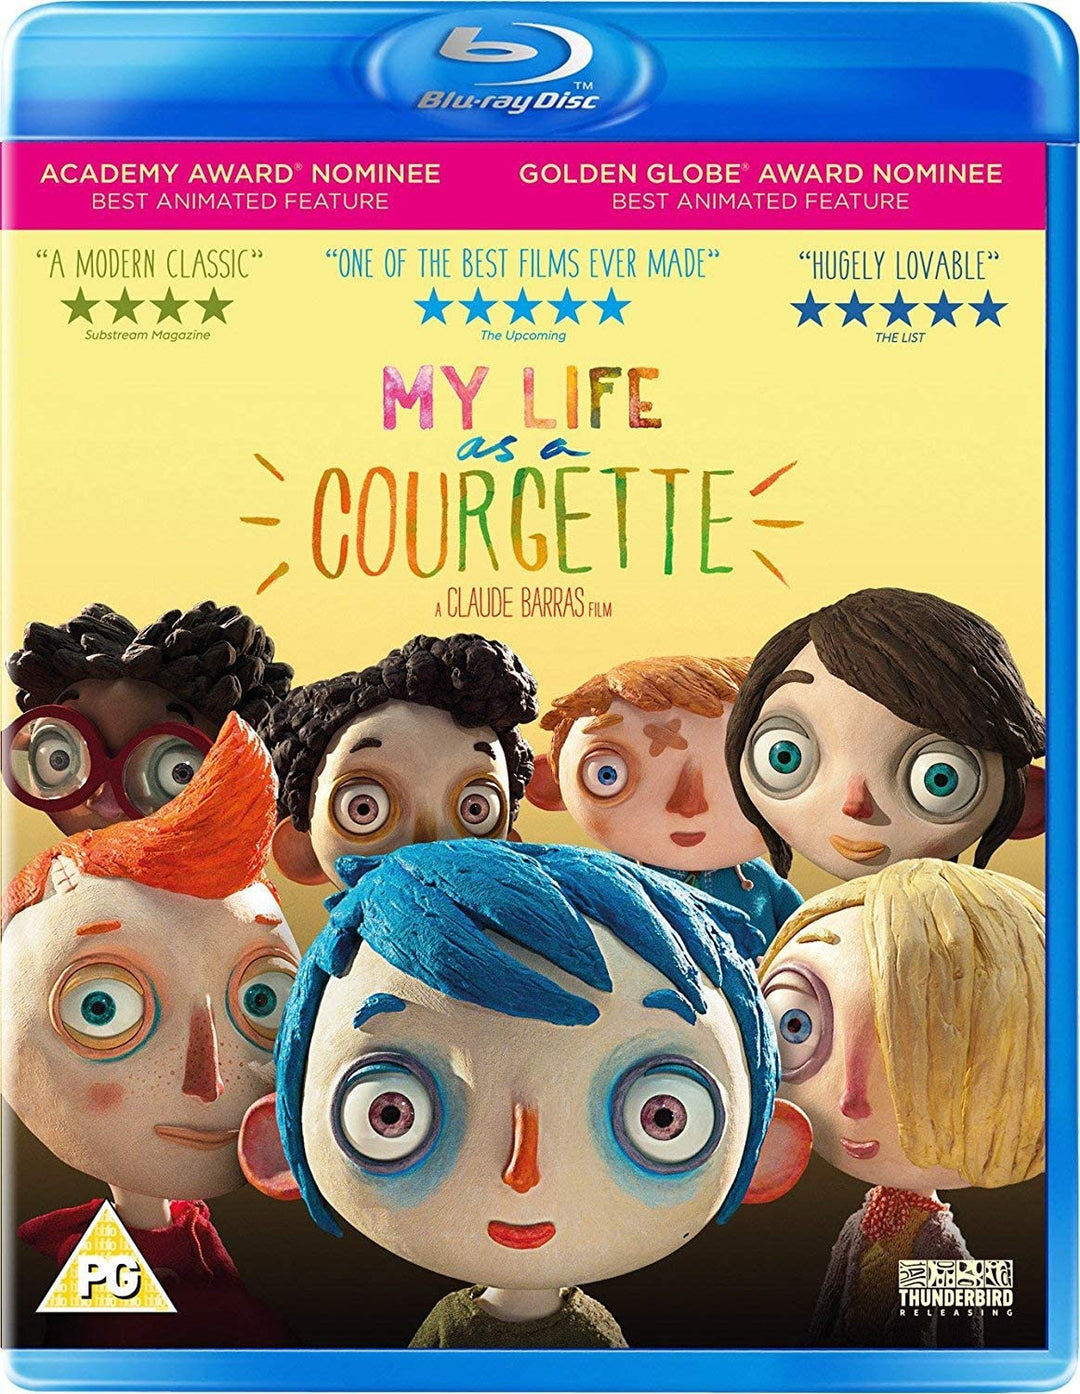 My Life As A Courgette - Family/Comedy [Blu-ray]